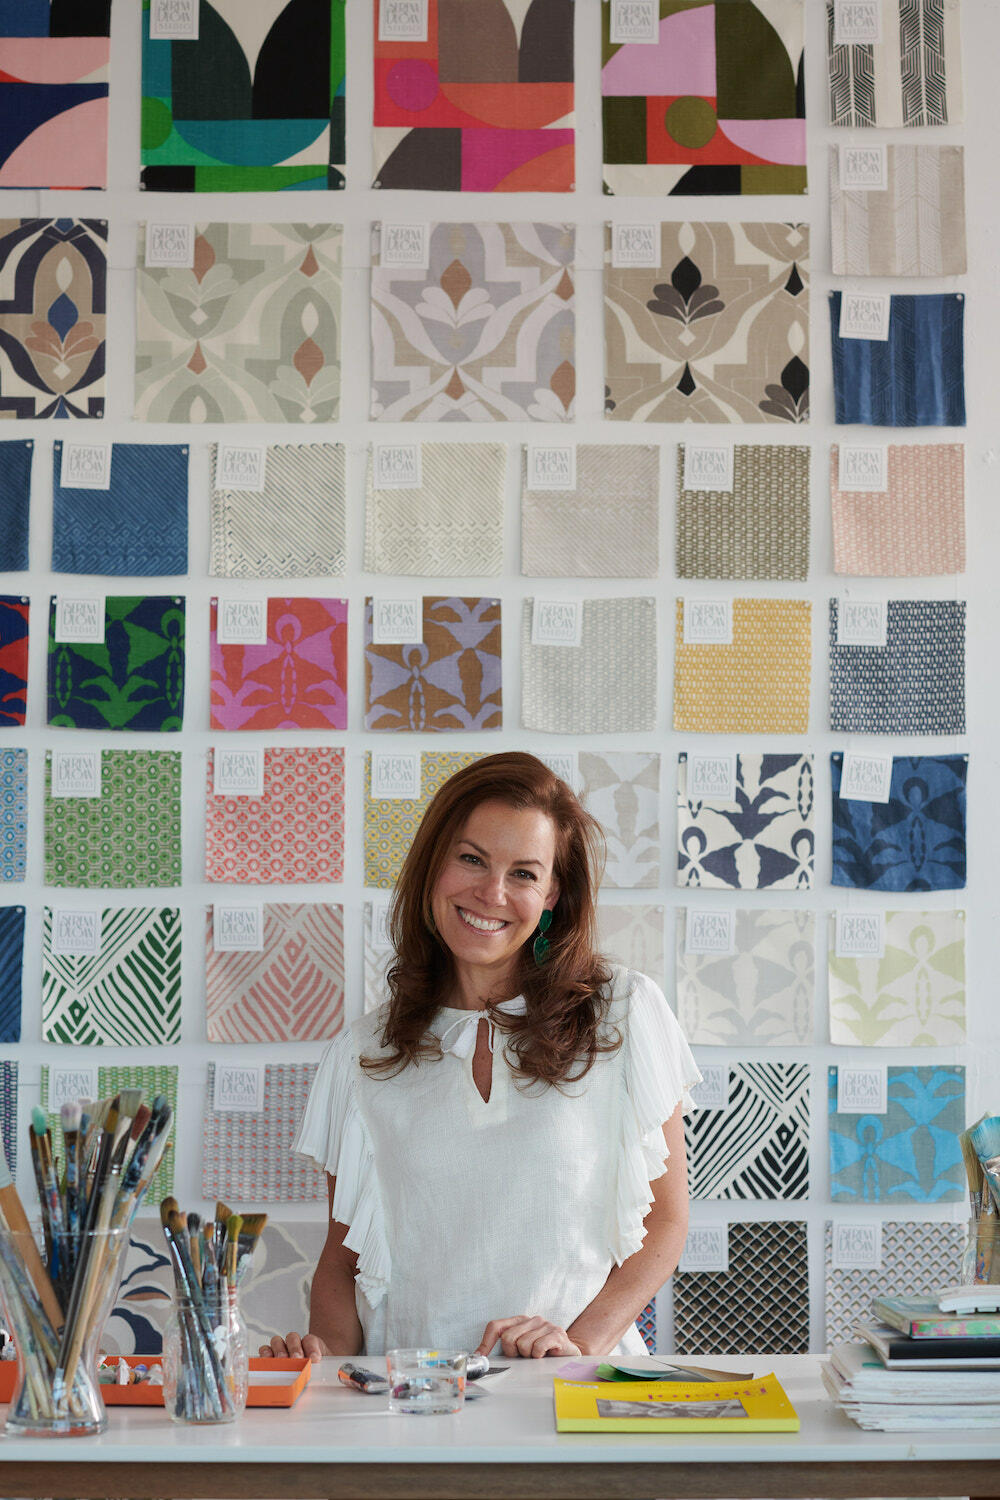 Serena Dugan’s block-printed designs are imbued with artistry